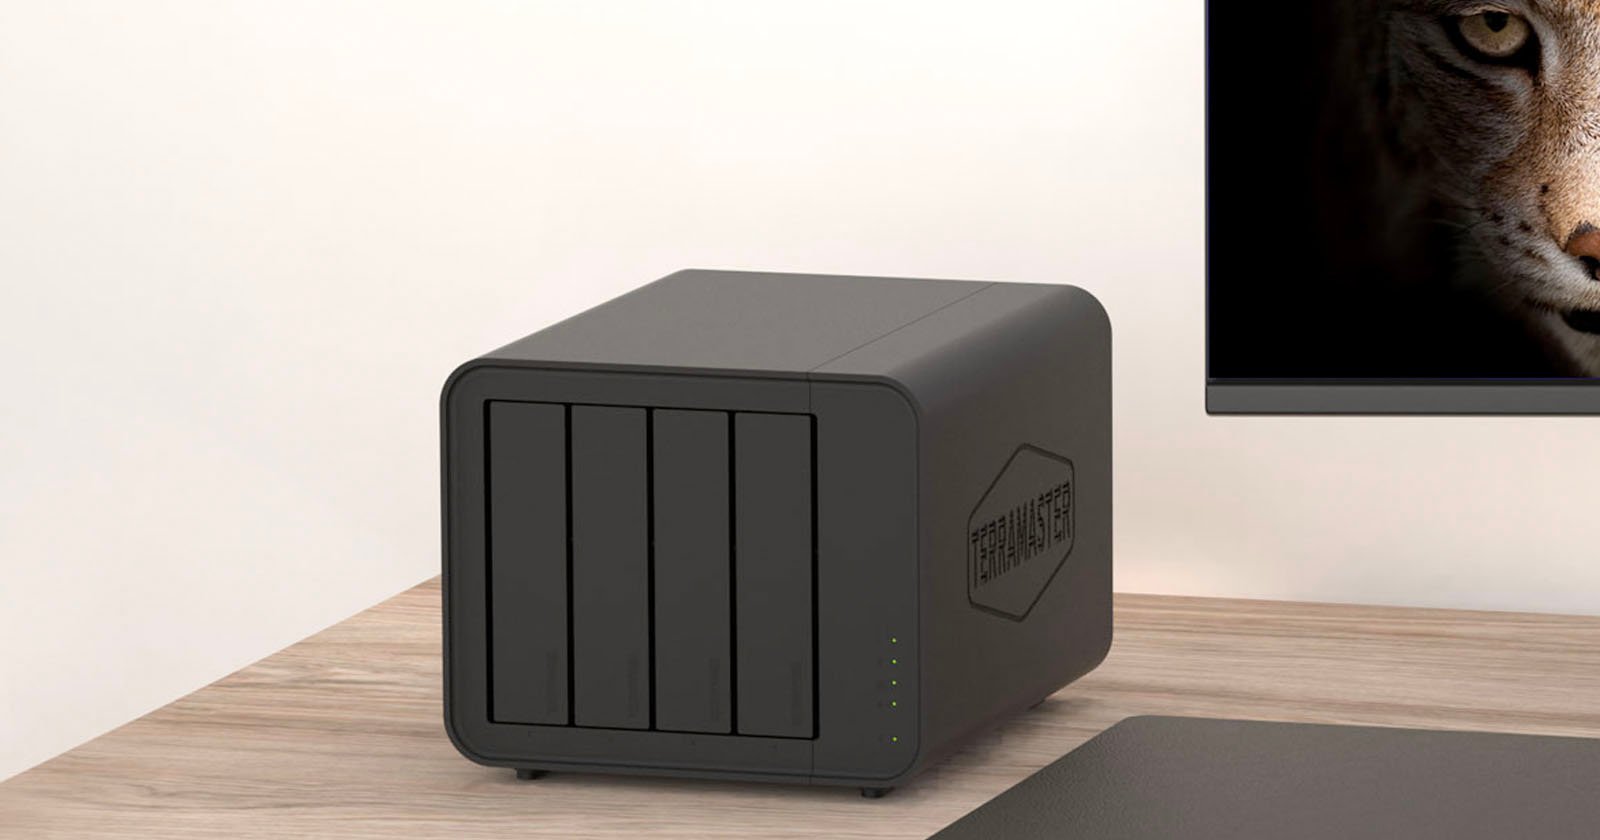  terramaster challenges synology most powerful 4-bay 